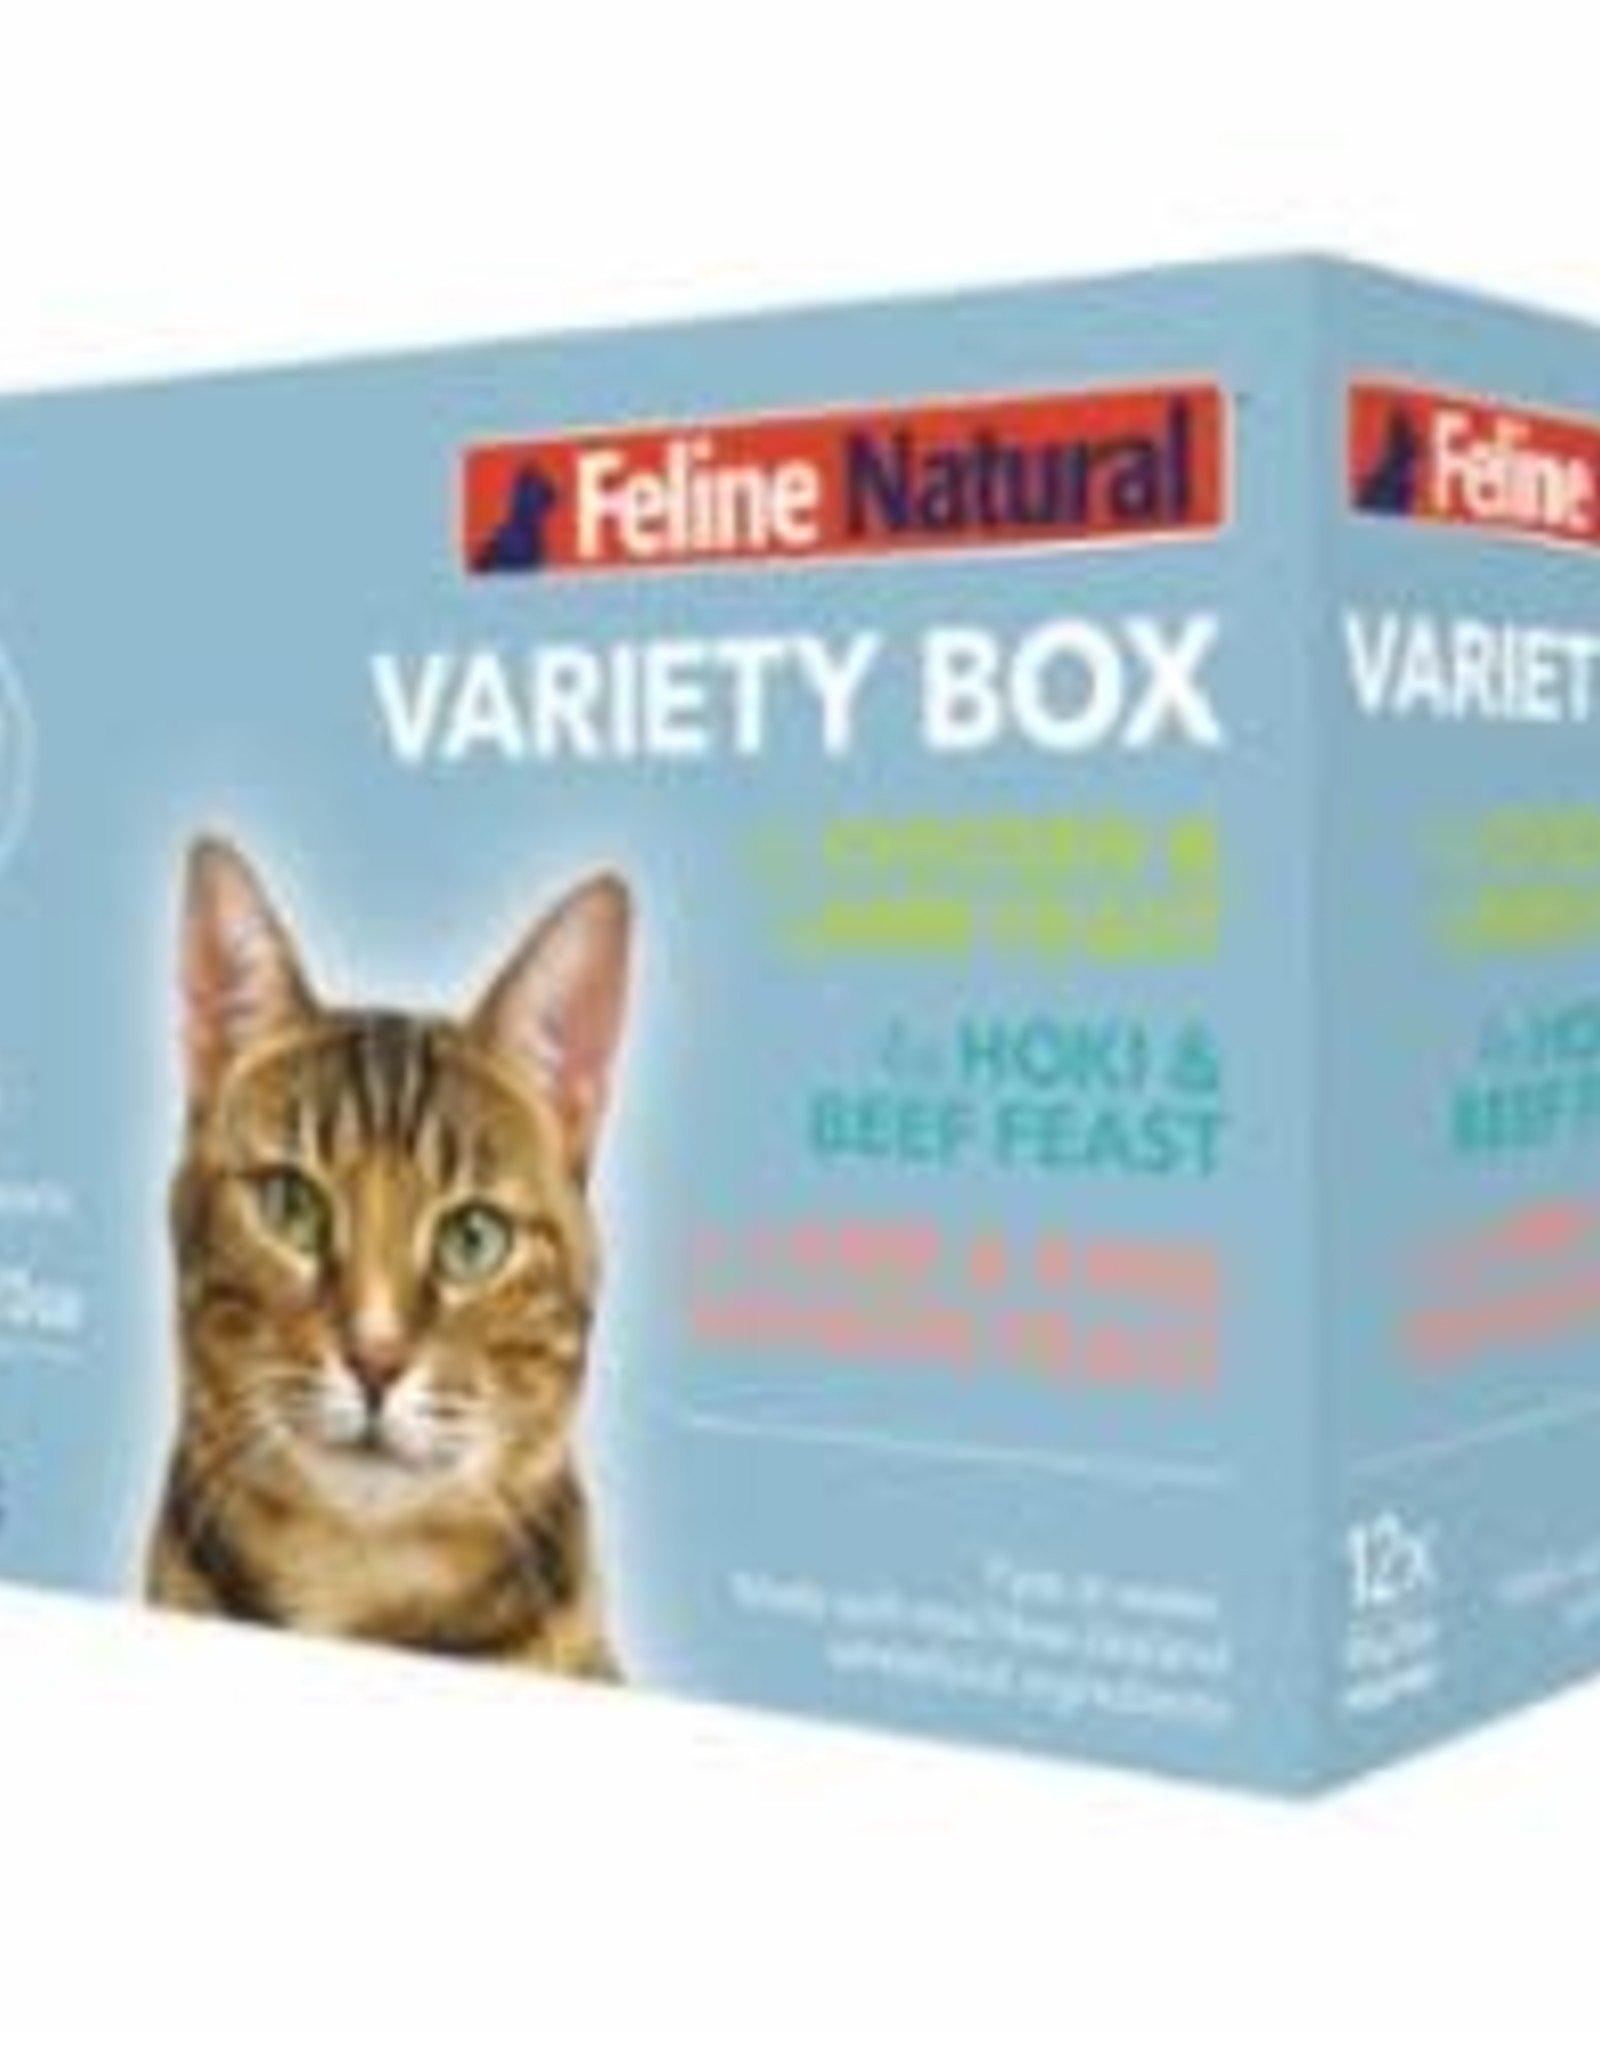 K9 Natural Feline Natural Pouch 3oz Variety Pack 12ct